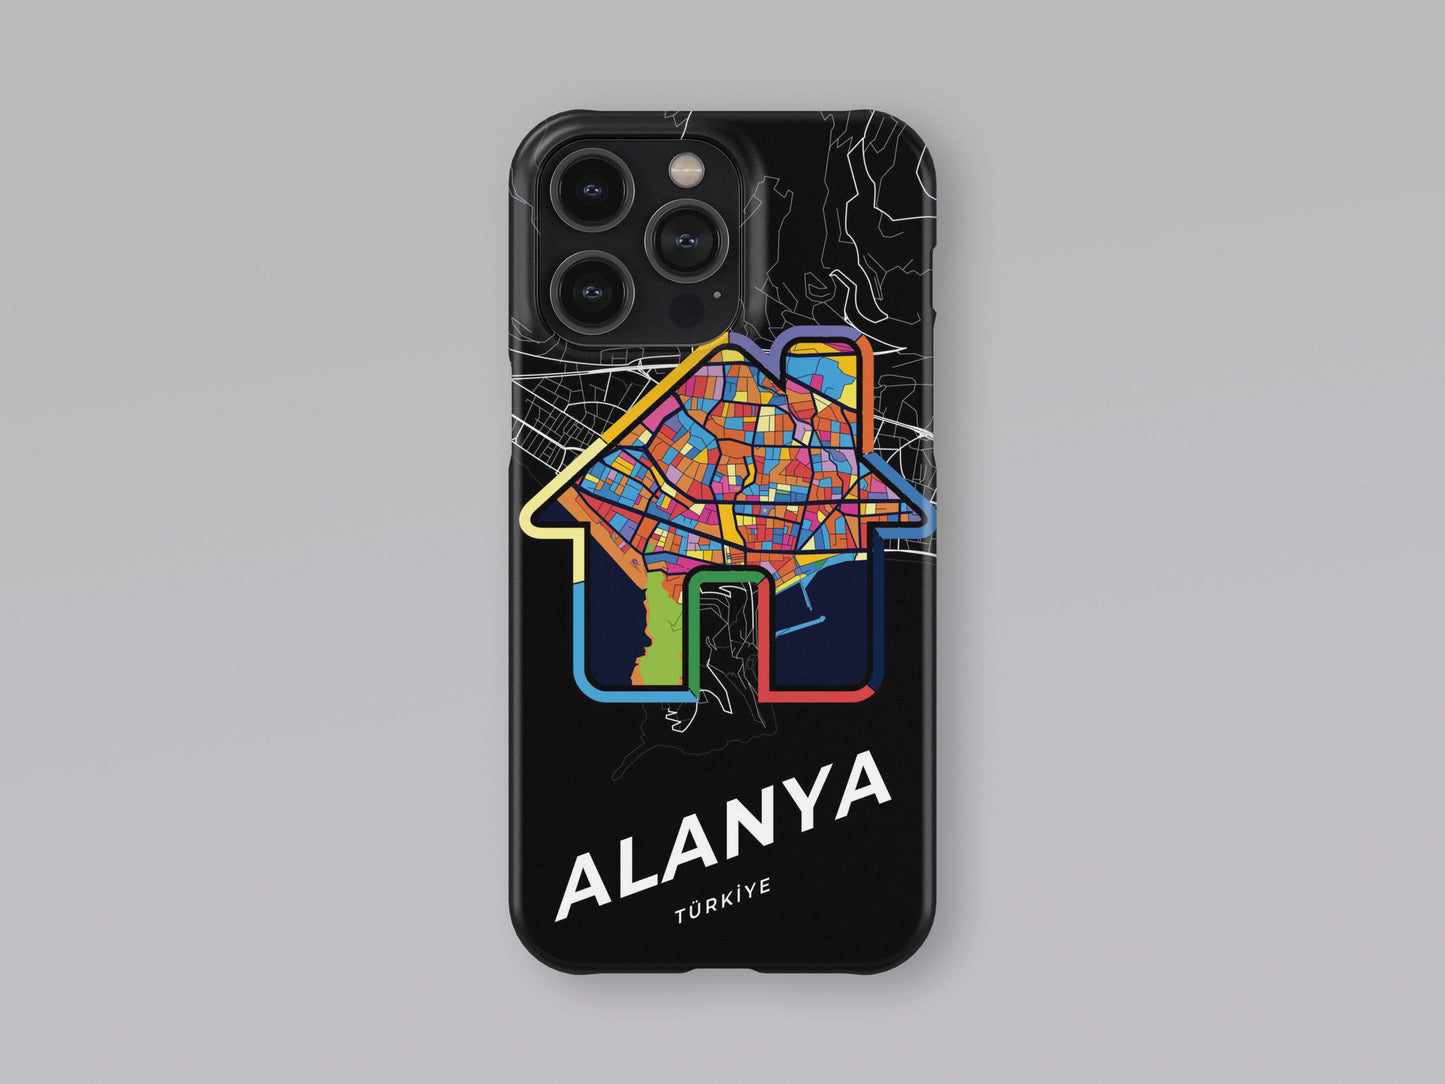 Alanya Turkey slim phone case with colorful icon. Birthday, wedding or housewarming gift. Couple match cases. 3